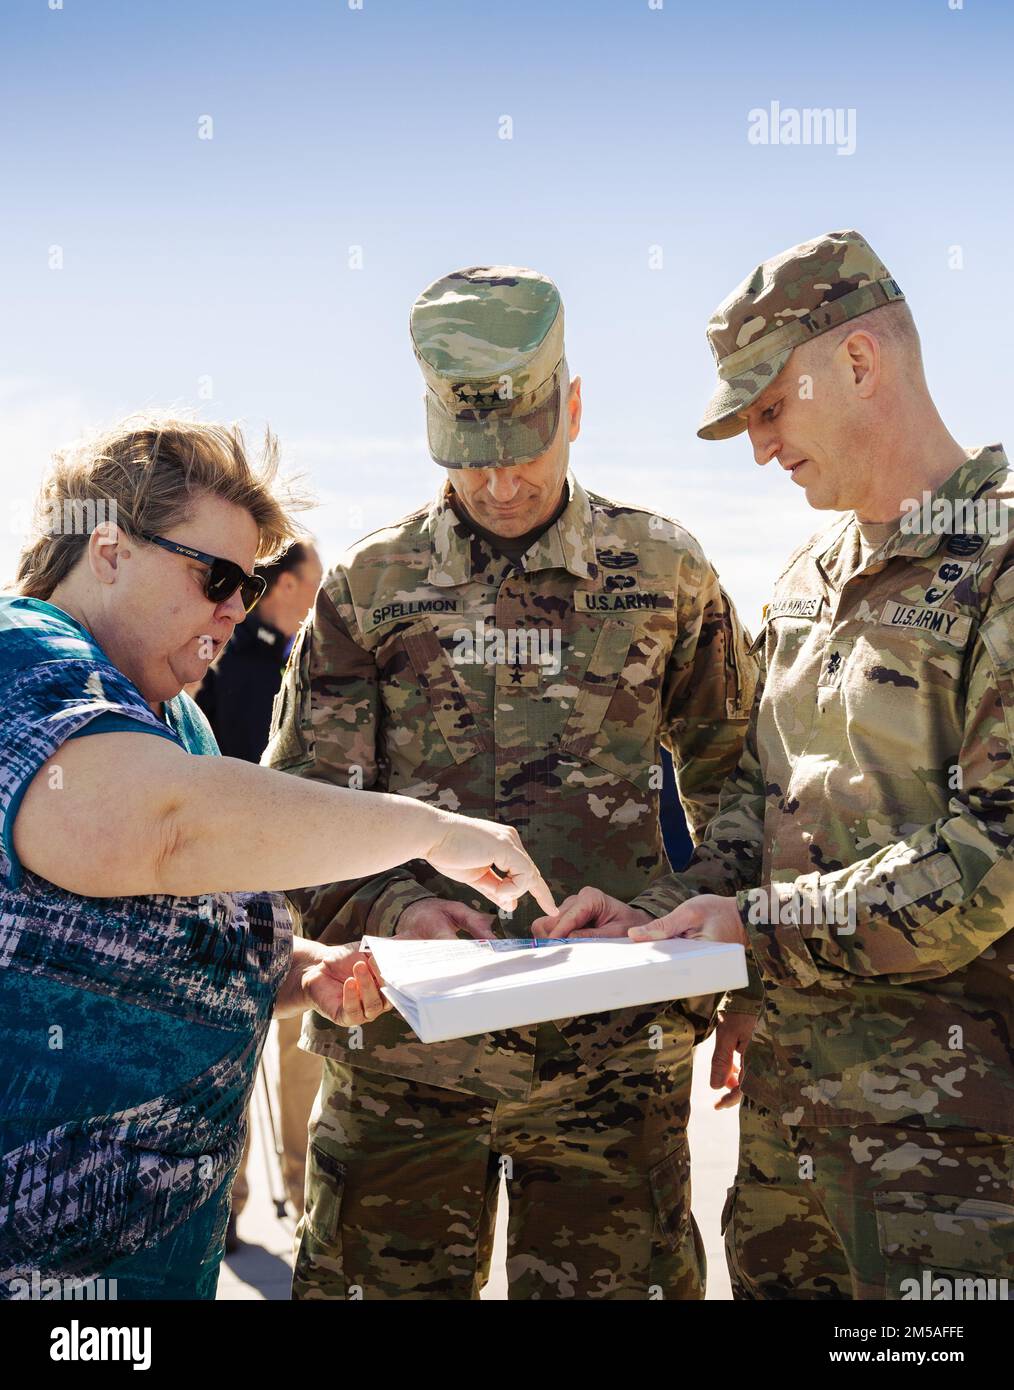 Lisa Metheney (left), Charleston District’s head civilian, and Lt. Col. Andrew Johannes (right), Charleston District commander, go over documents with Lt. Gen. Scott Spellmon, 55th chief of engineers and commanding general of the U.S. Army Corps of Engineers. Stock Photo